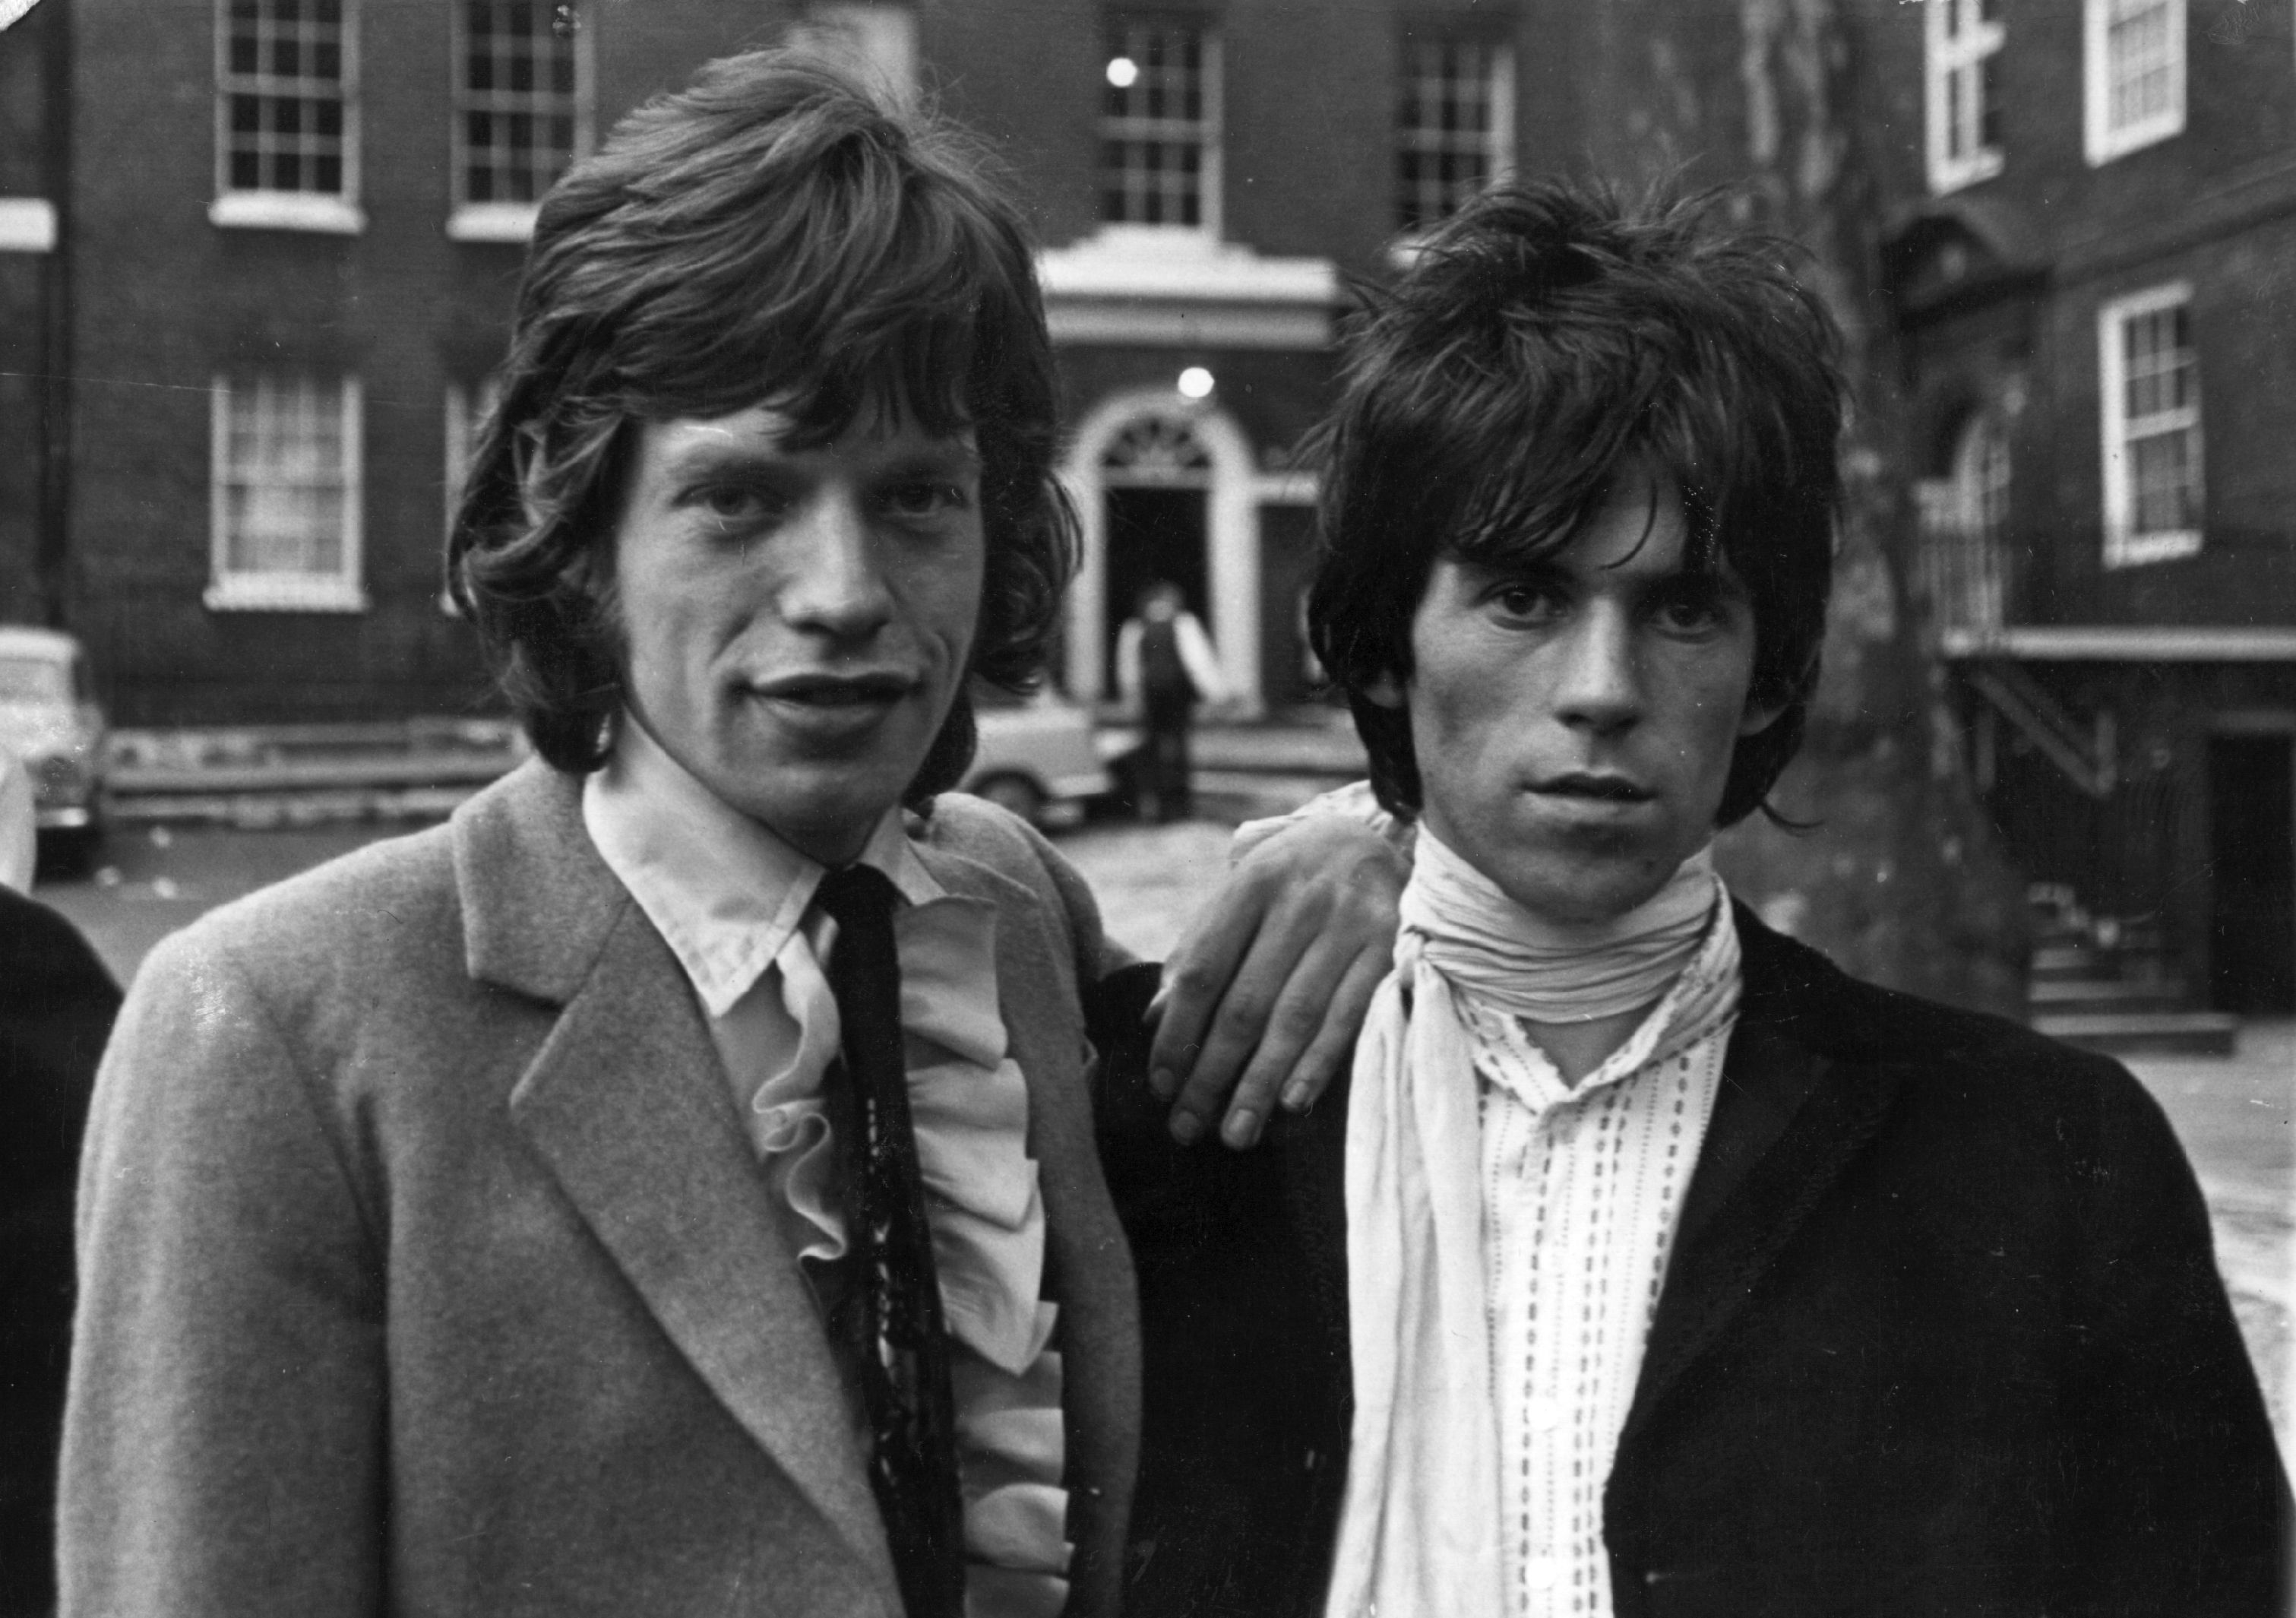 The Rolling Stones’ Mick Jagger and Keith Richards in front of a building